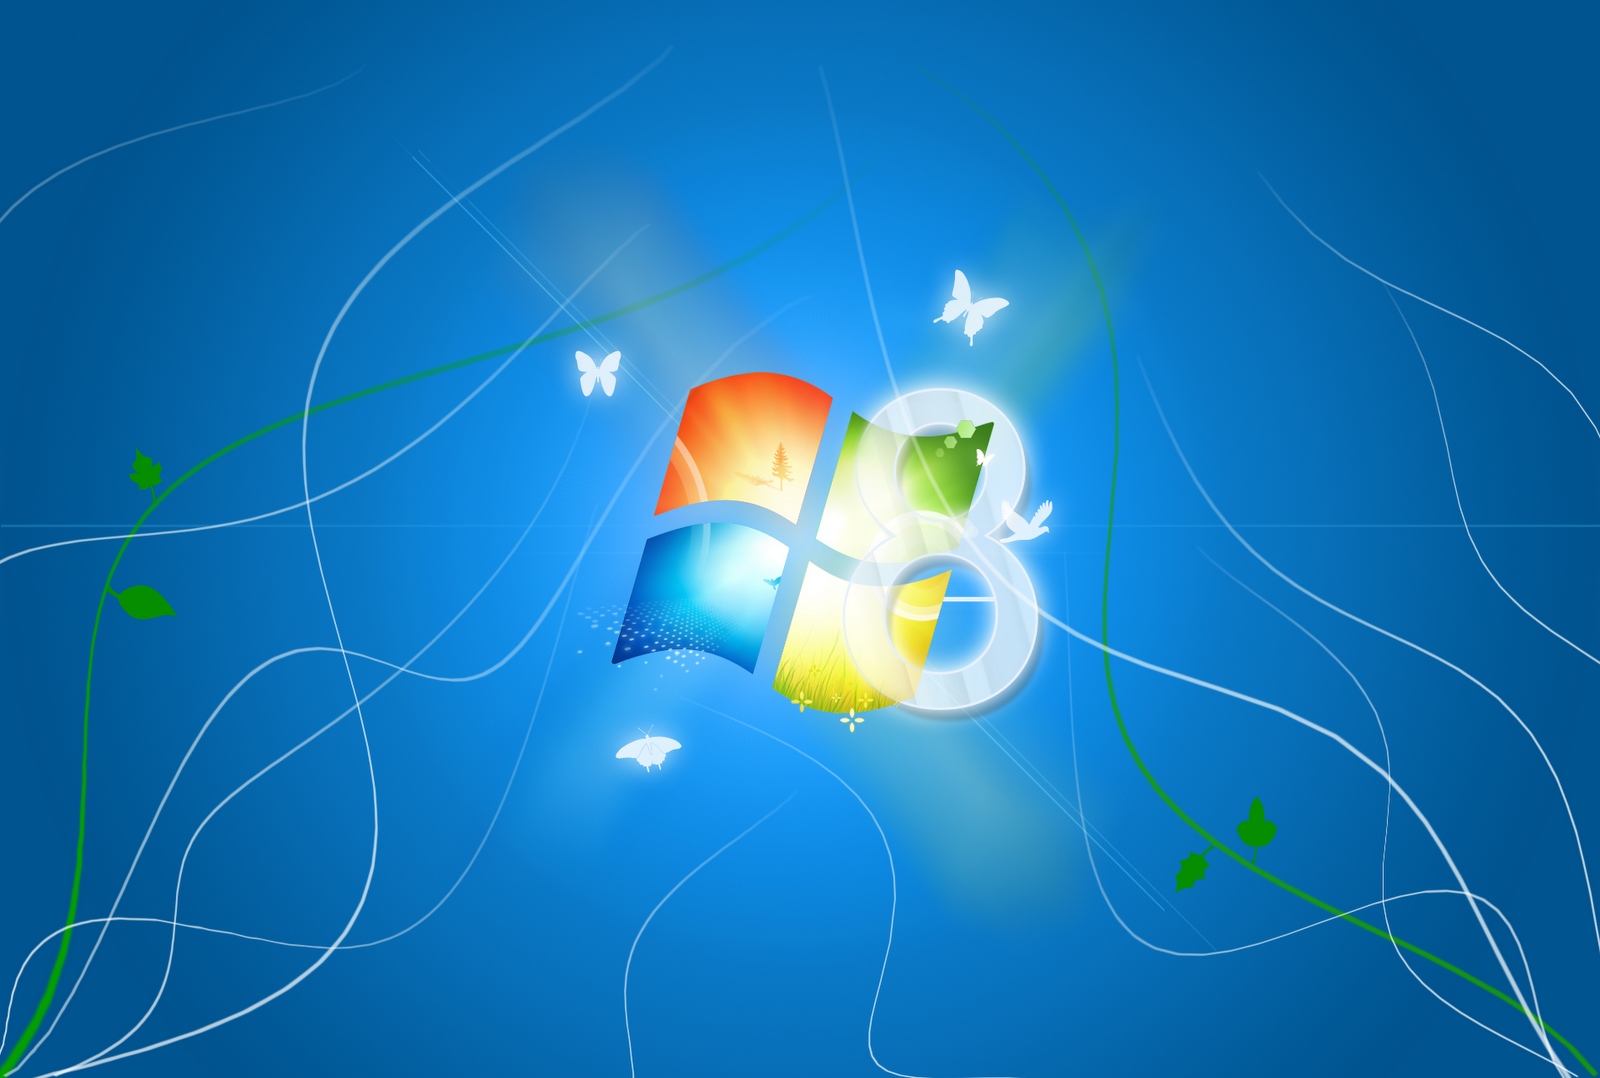 TechnoCage 25 Official Windows 8 Wallpapers In HD